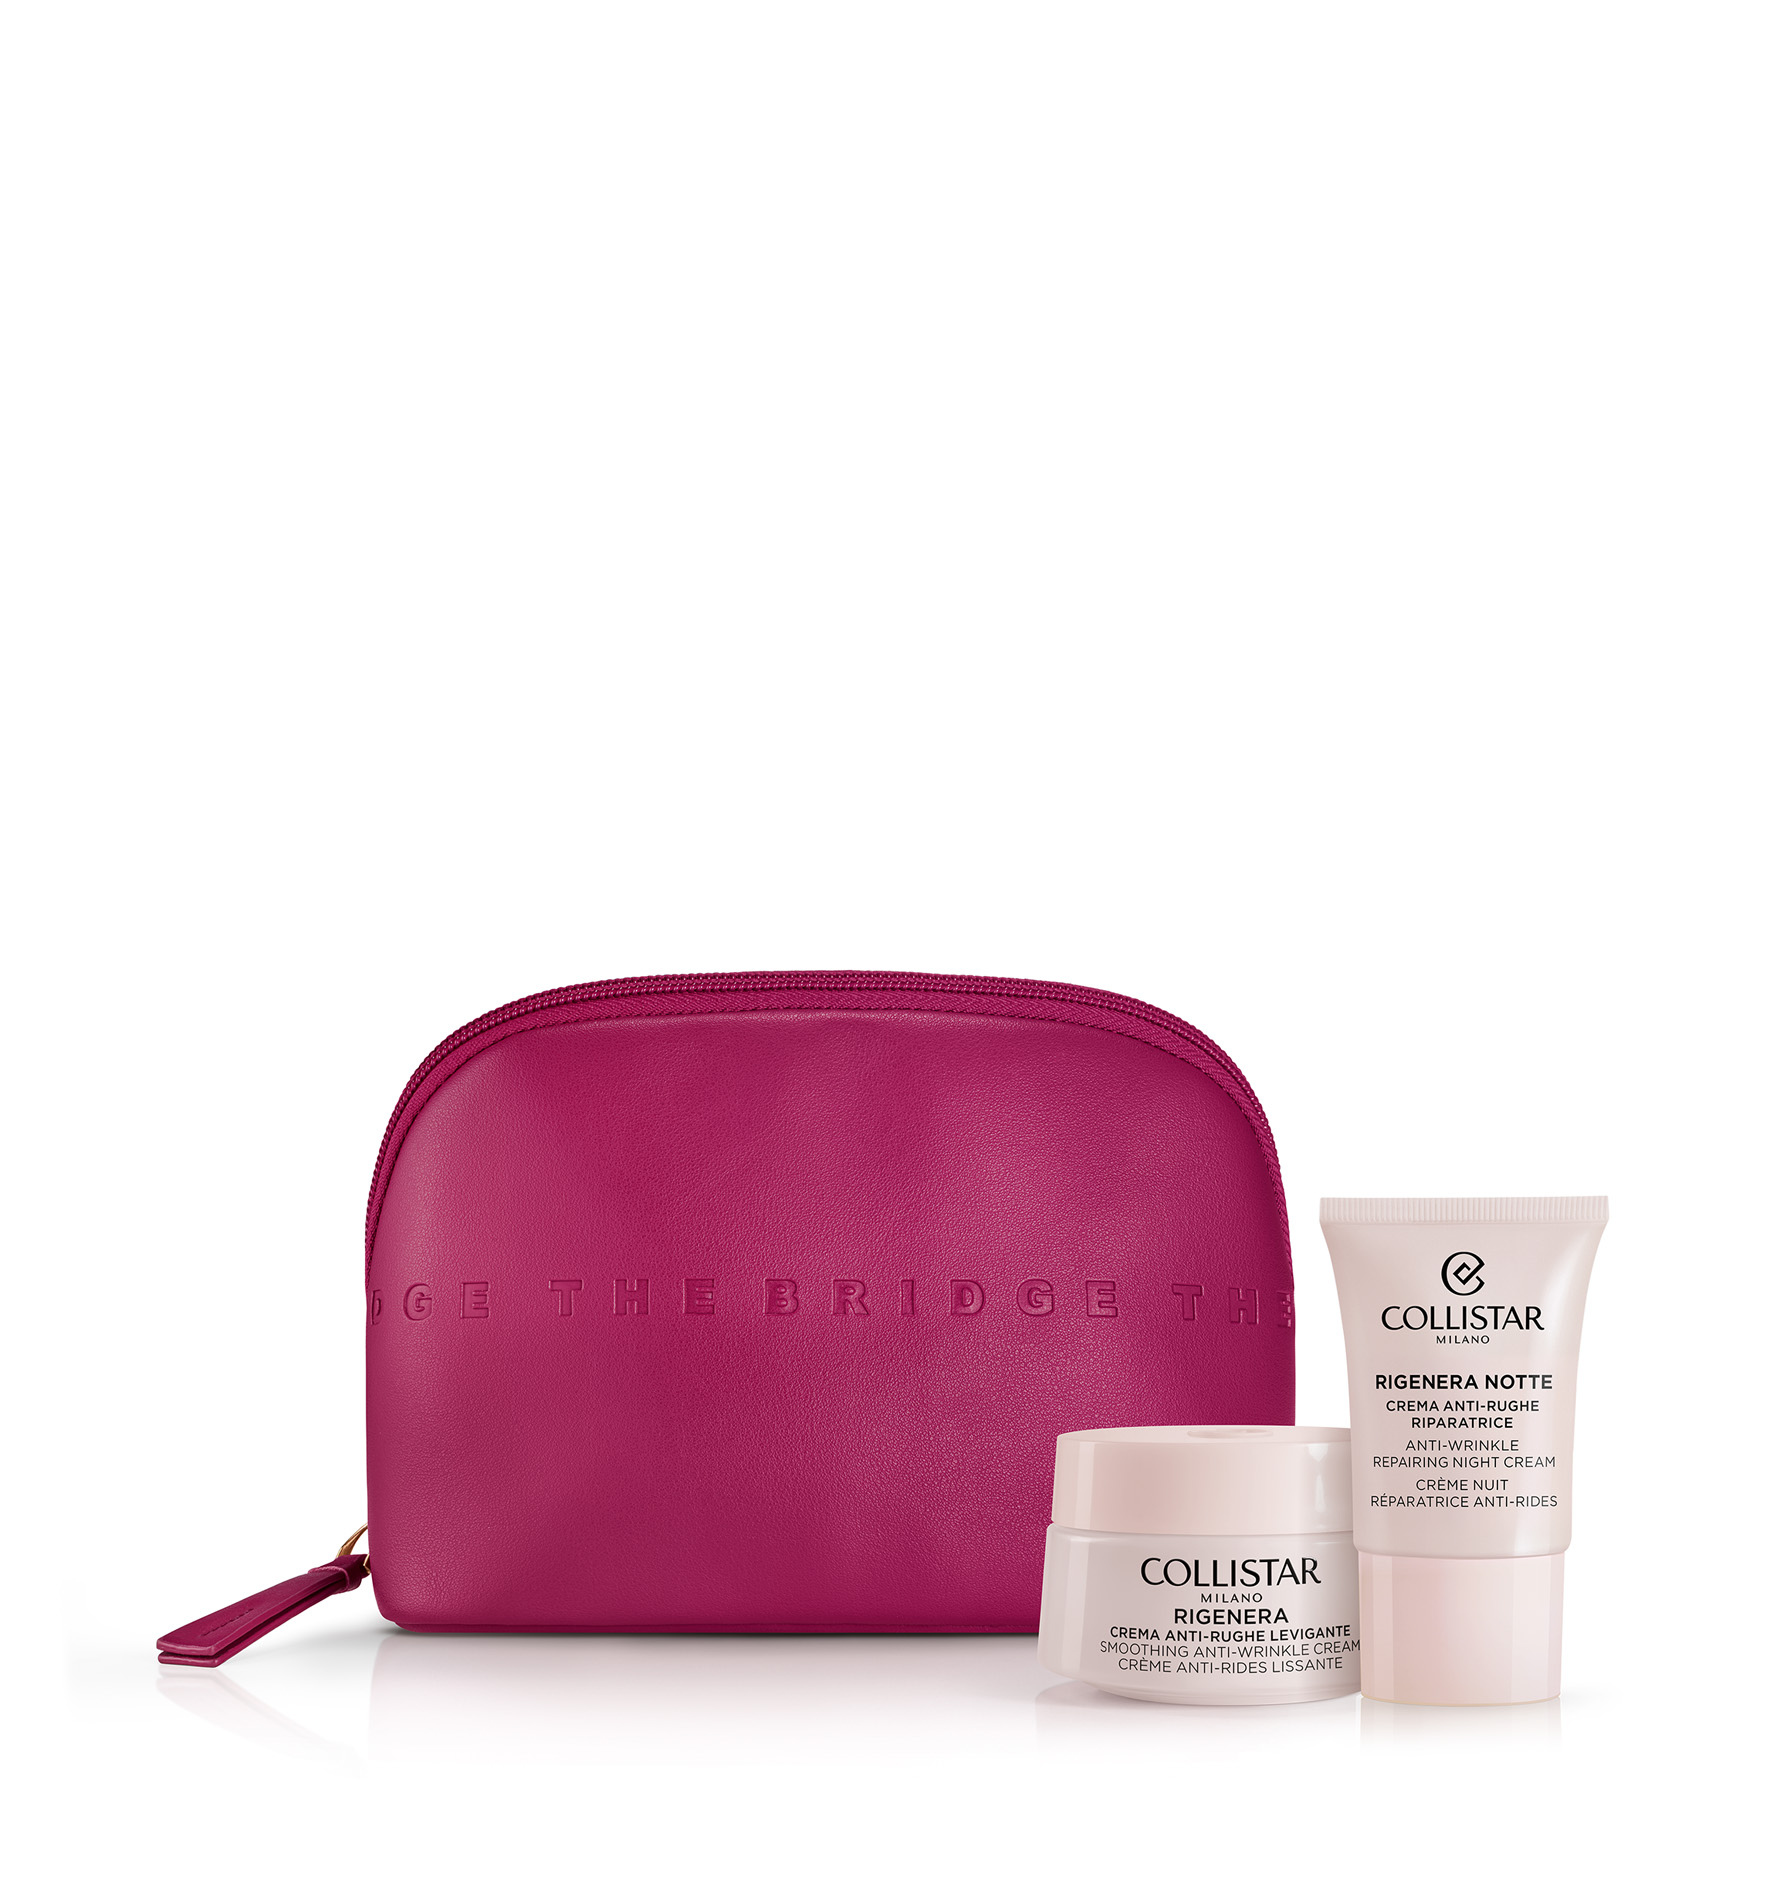 RIGENERA SMOOTHING ANTI-WRINKLE CREAM FACE AND NECK GIFT SET - CADEAU IDEEËN | Collistar - Shop Online Ufficiale